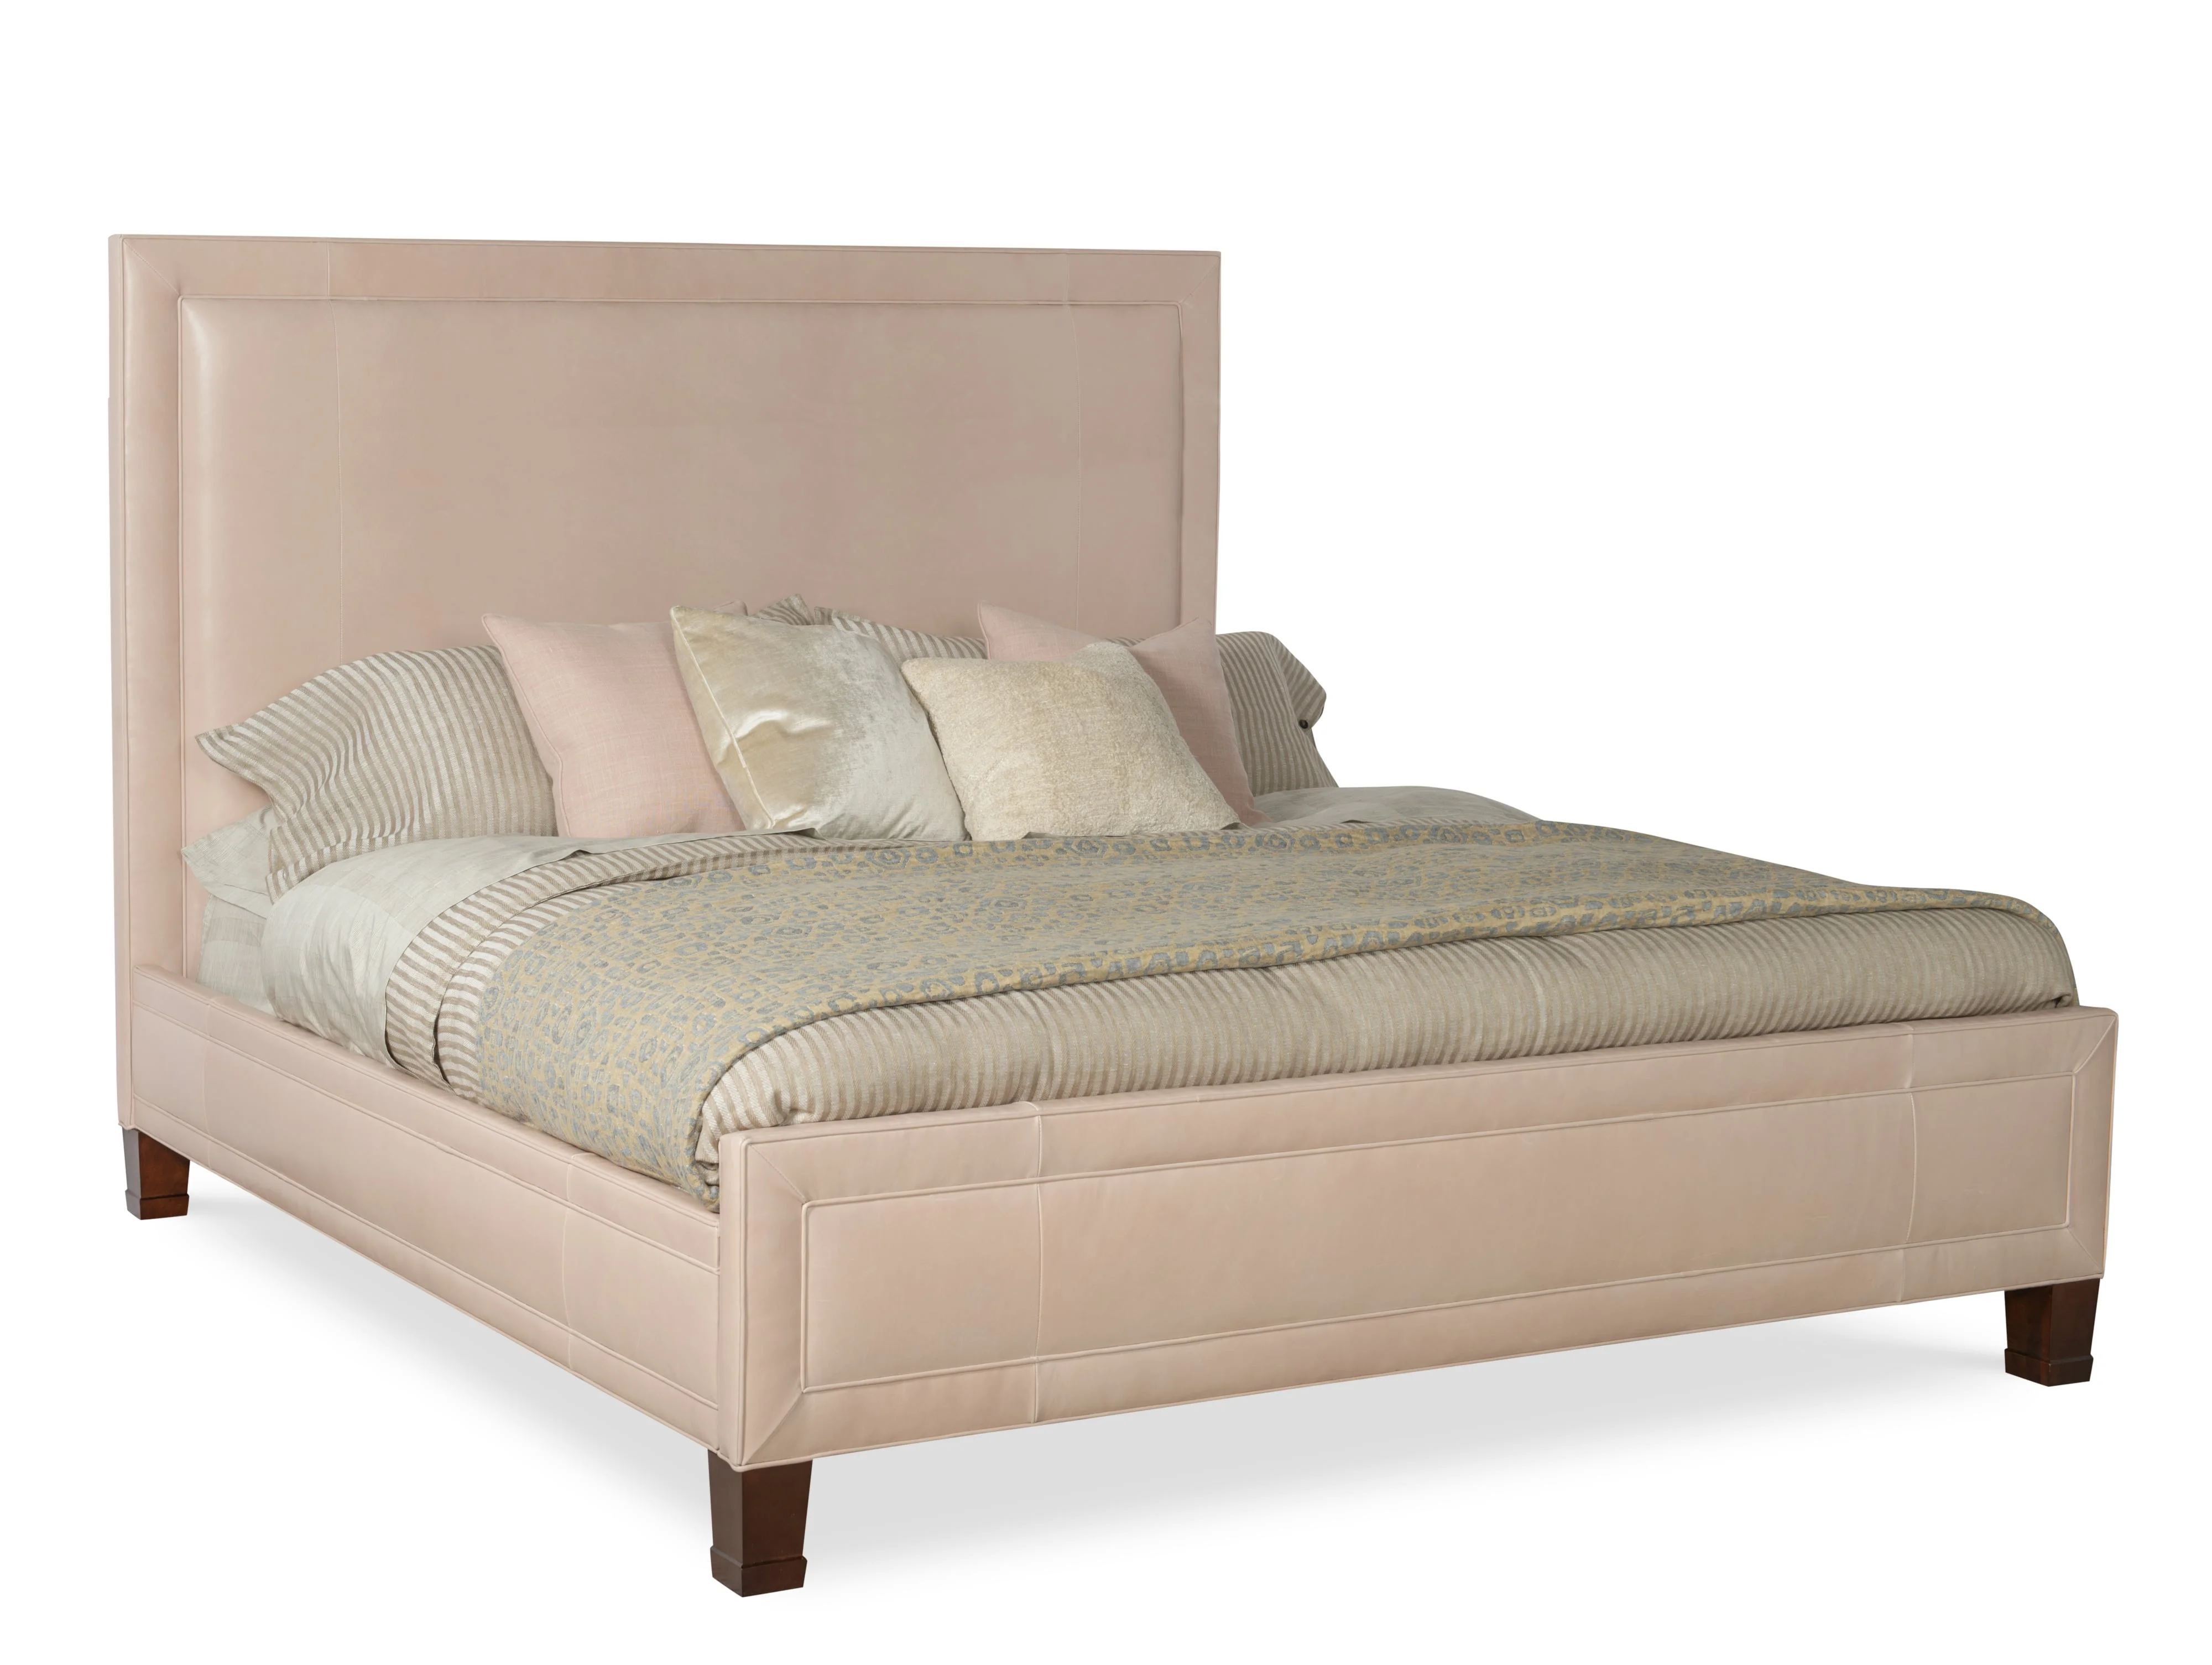 Century Thomas Obrien Fifth Avenue Modern Upholstered King Bed With Tall Headboard Sprintz 